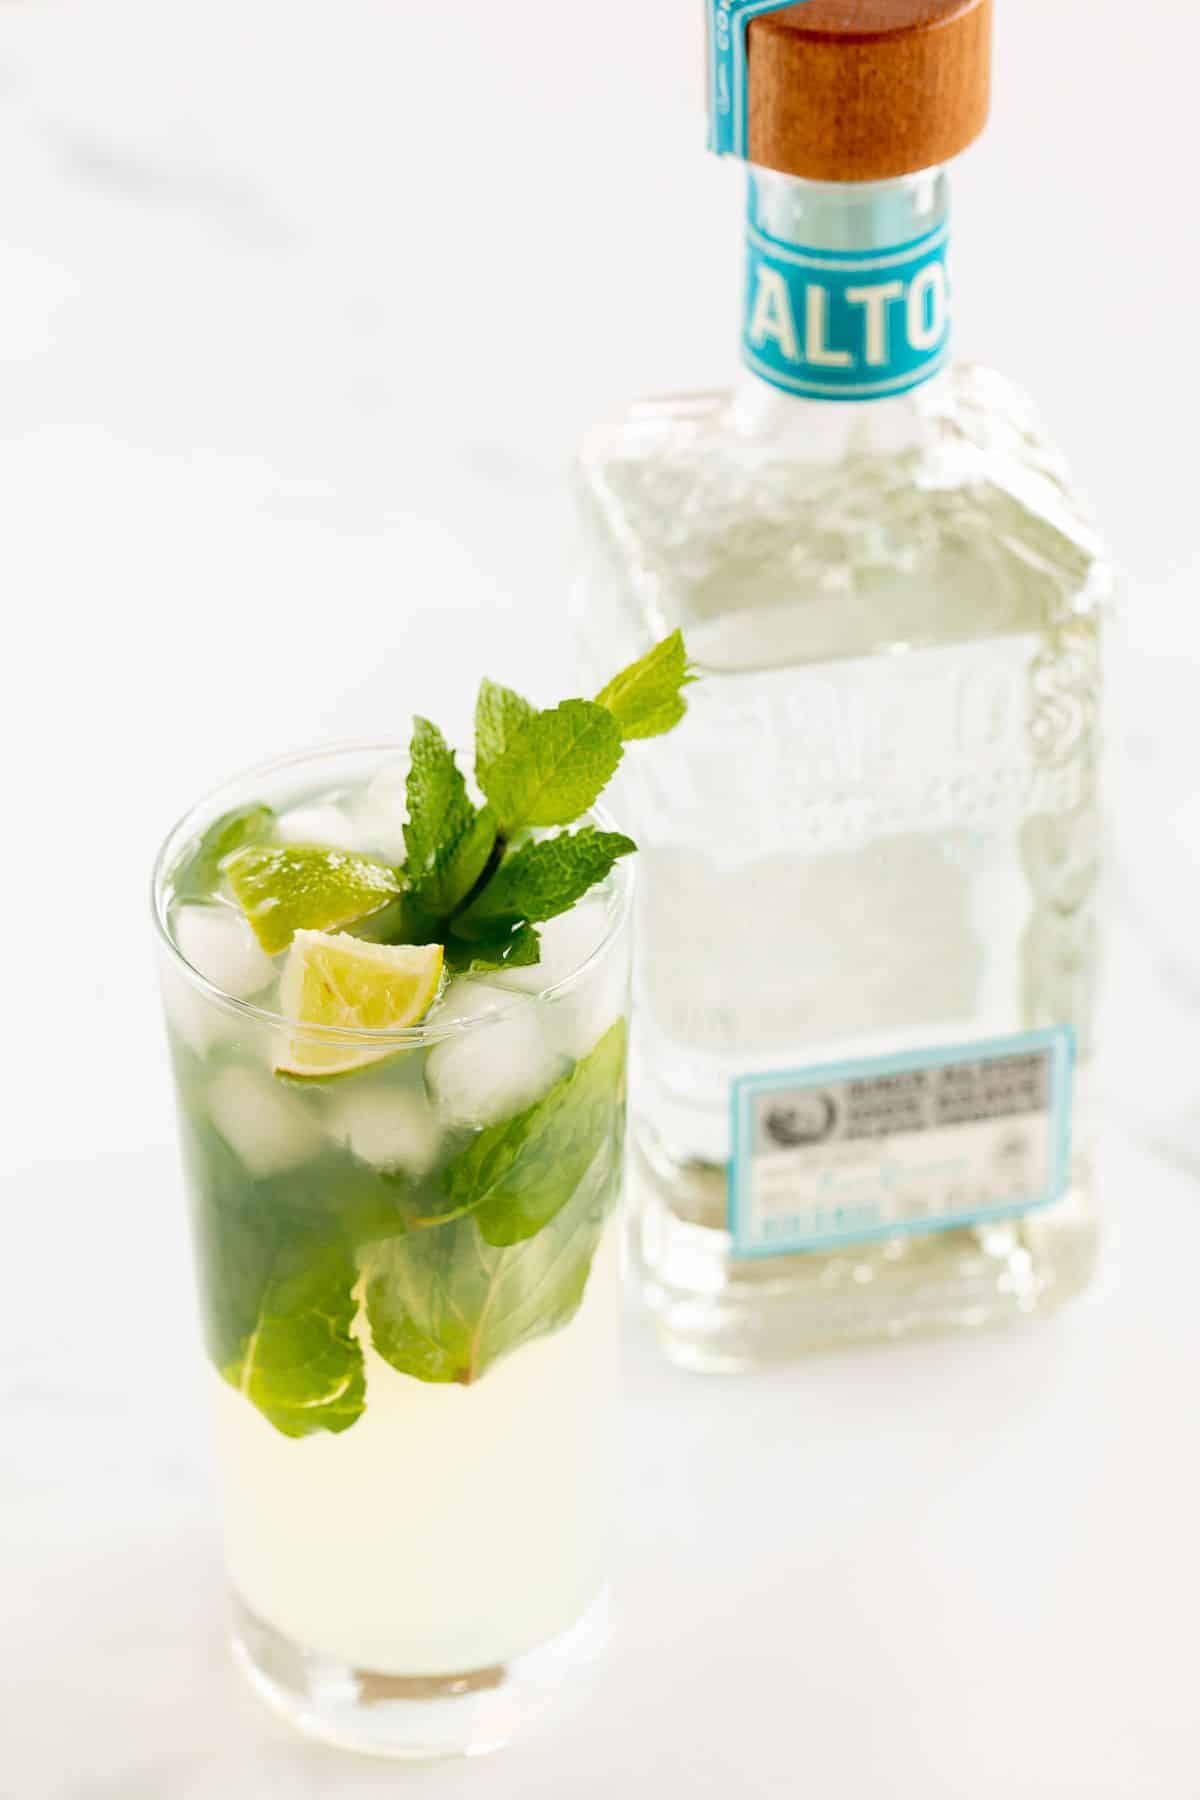 A tequila mojito in a clear glass on a white surface, garnished with lime wedges and fresh mint, bottle of tequila in the background.